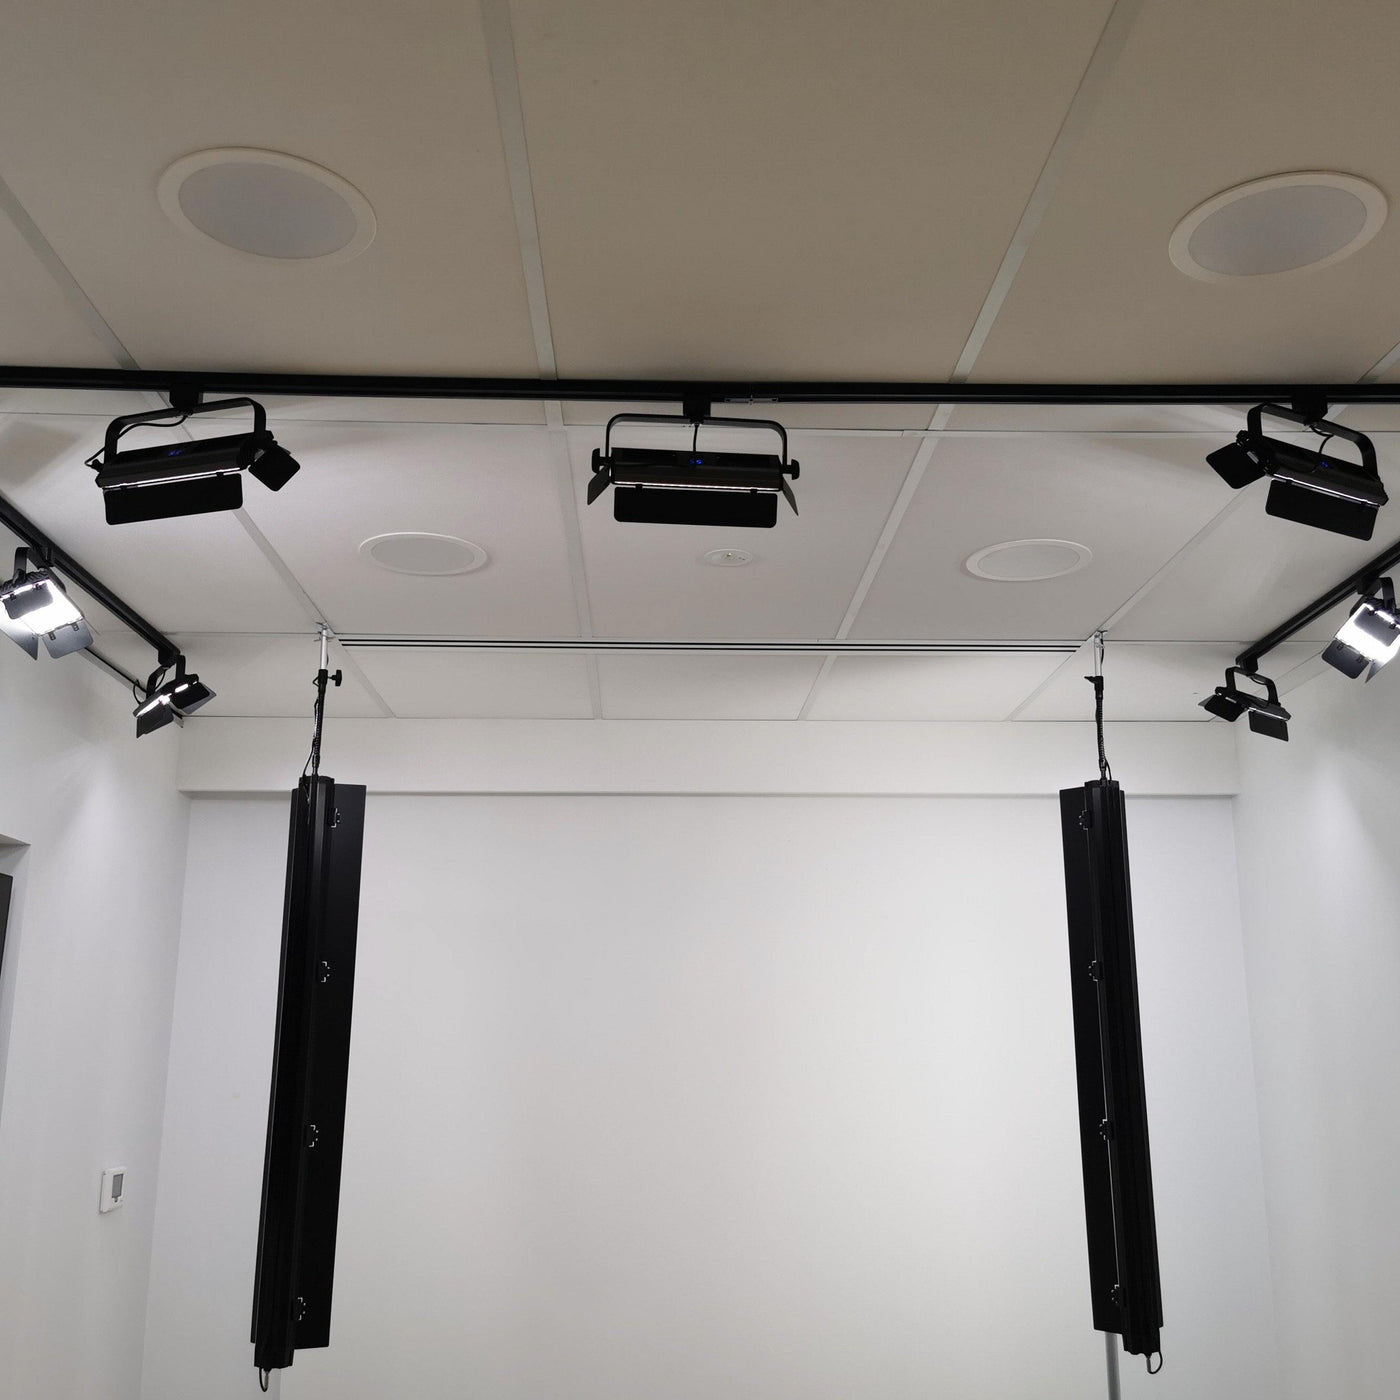 Ceiling Mounted Lighting Solutions - Dragon Image